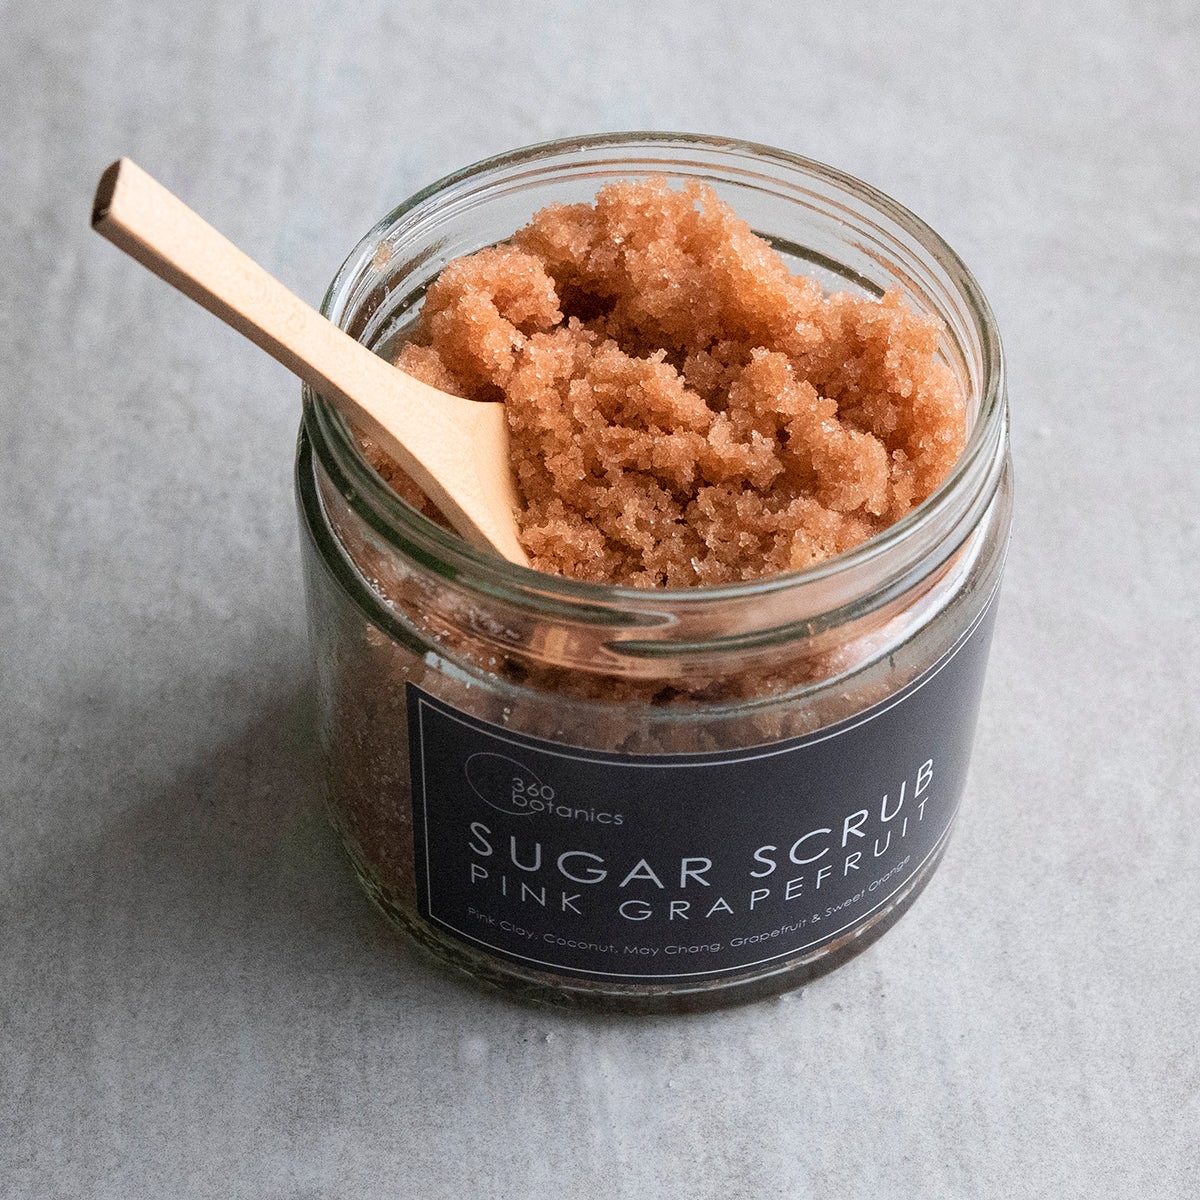 Photo of Sugar Scrub glass jar open with spoon photographed on marble floor tile